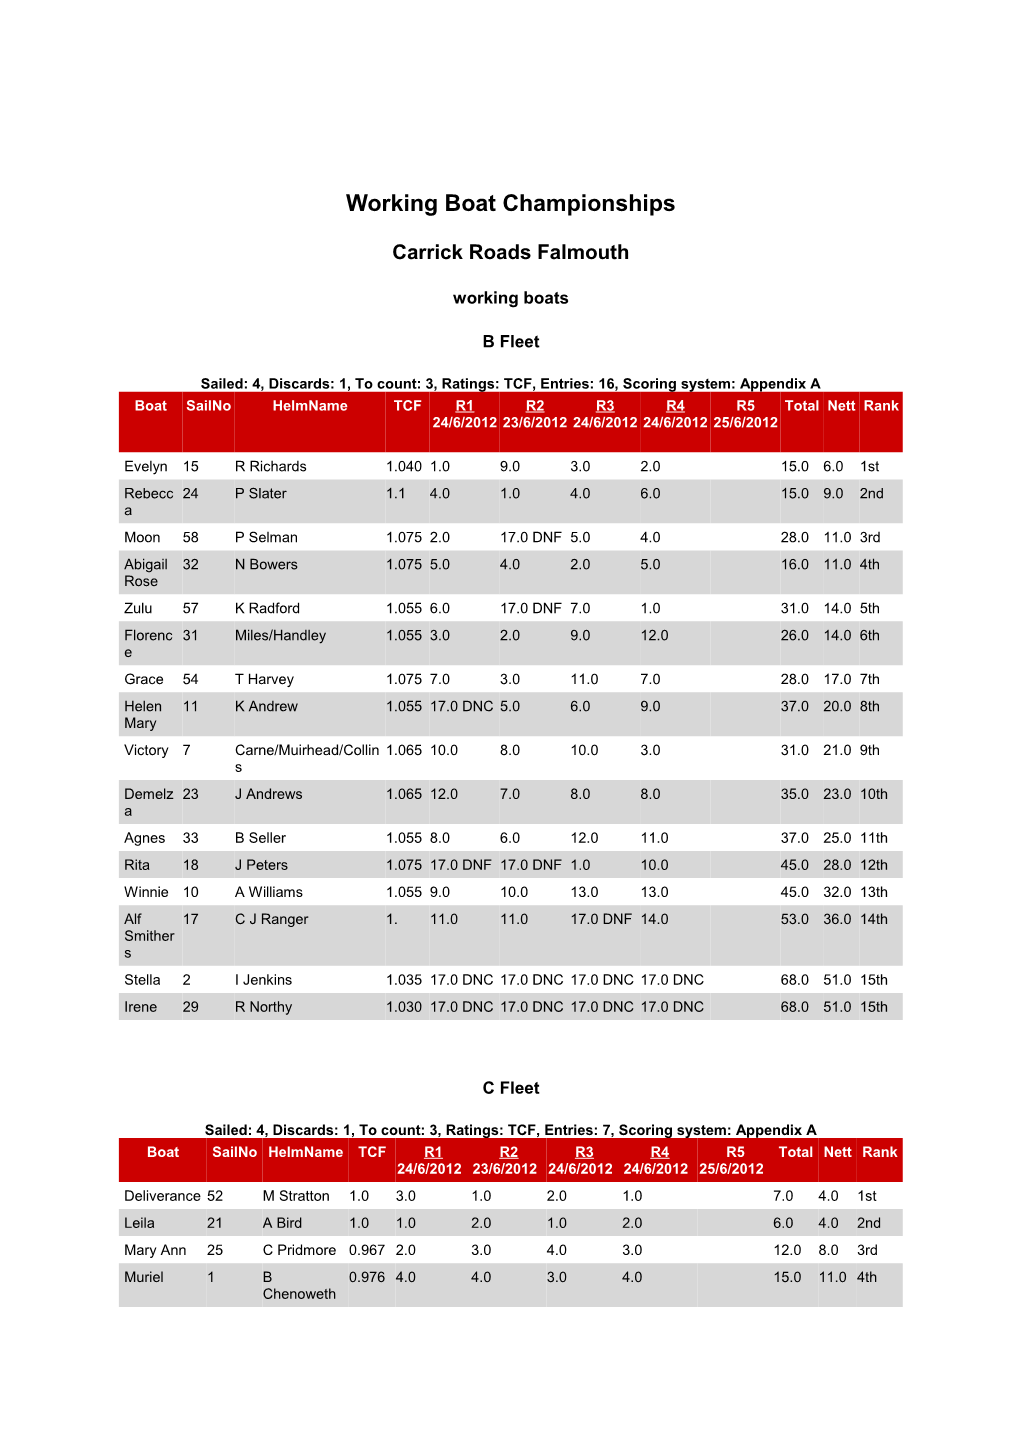 Sailwave Results for Working Boat Championships - Carrick Roads Falmouth